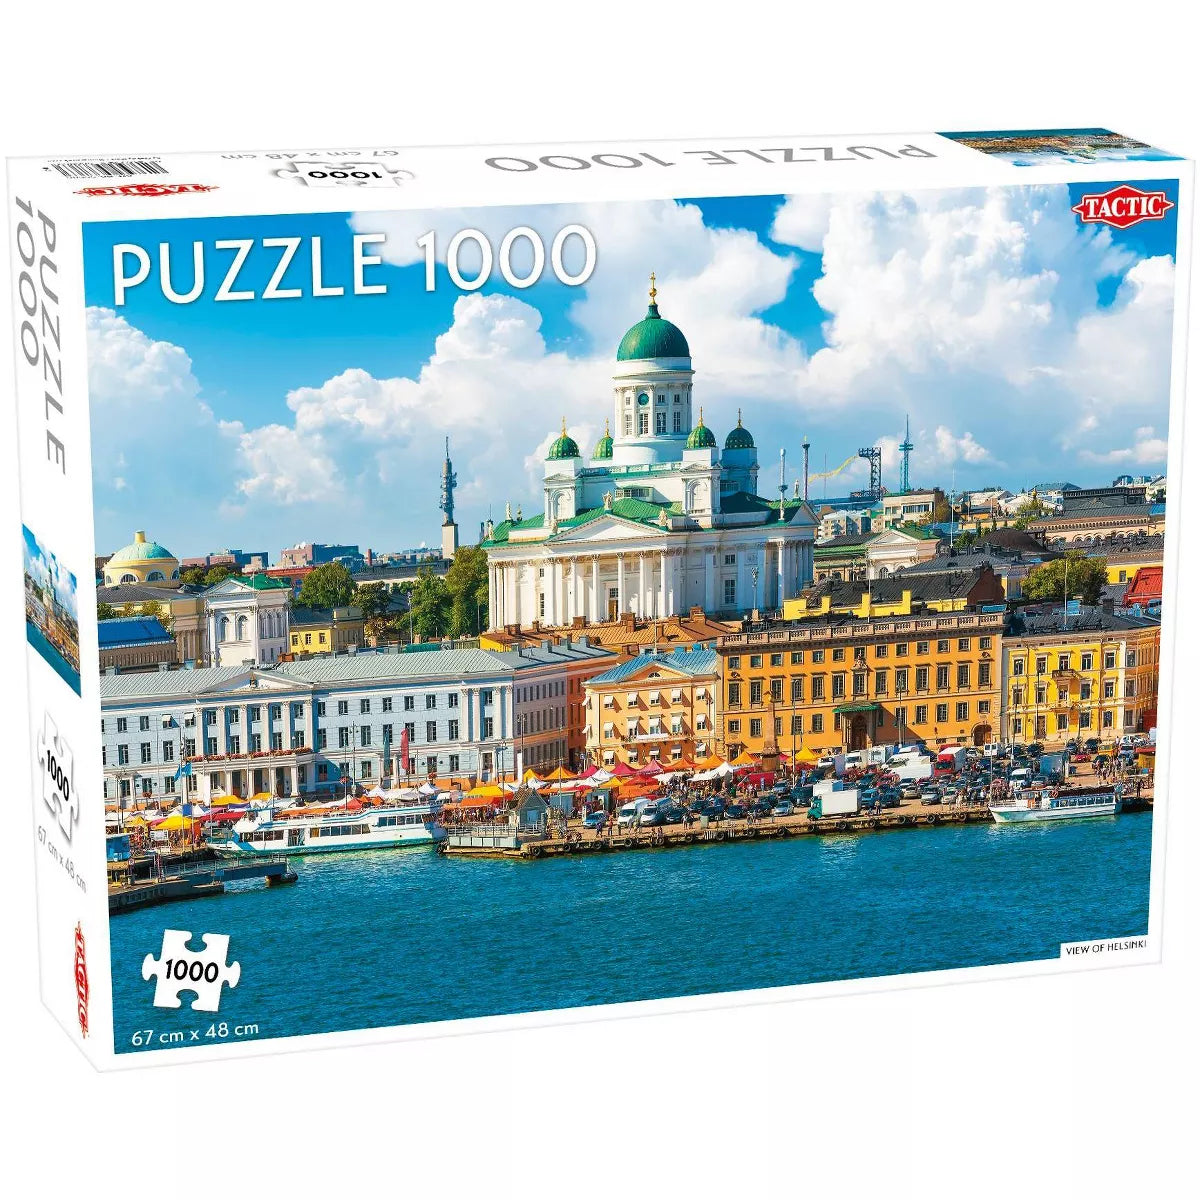 View of Helsinki, Finland Jigsaw Puzzle - 1000pc